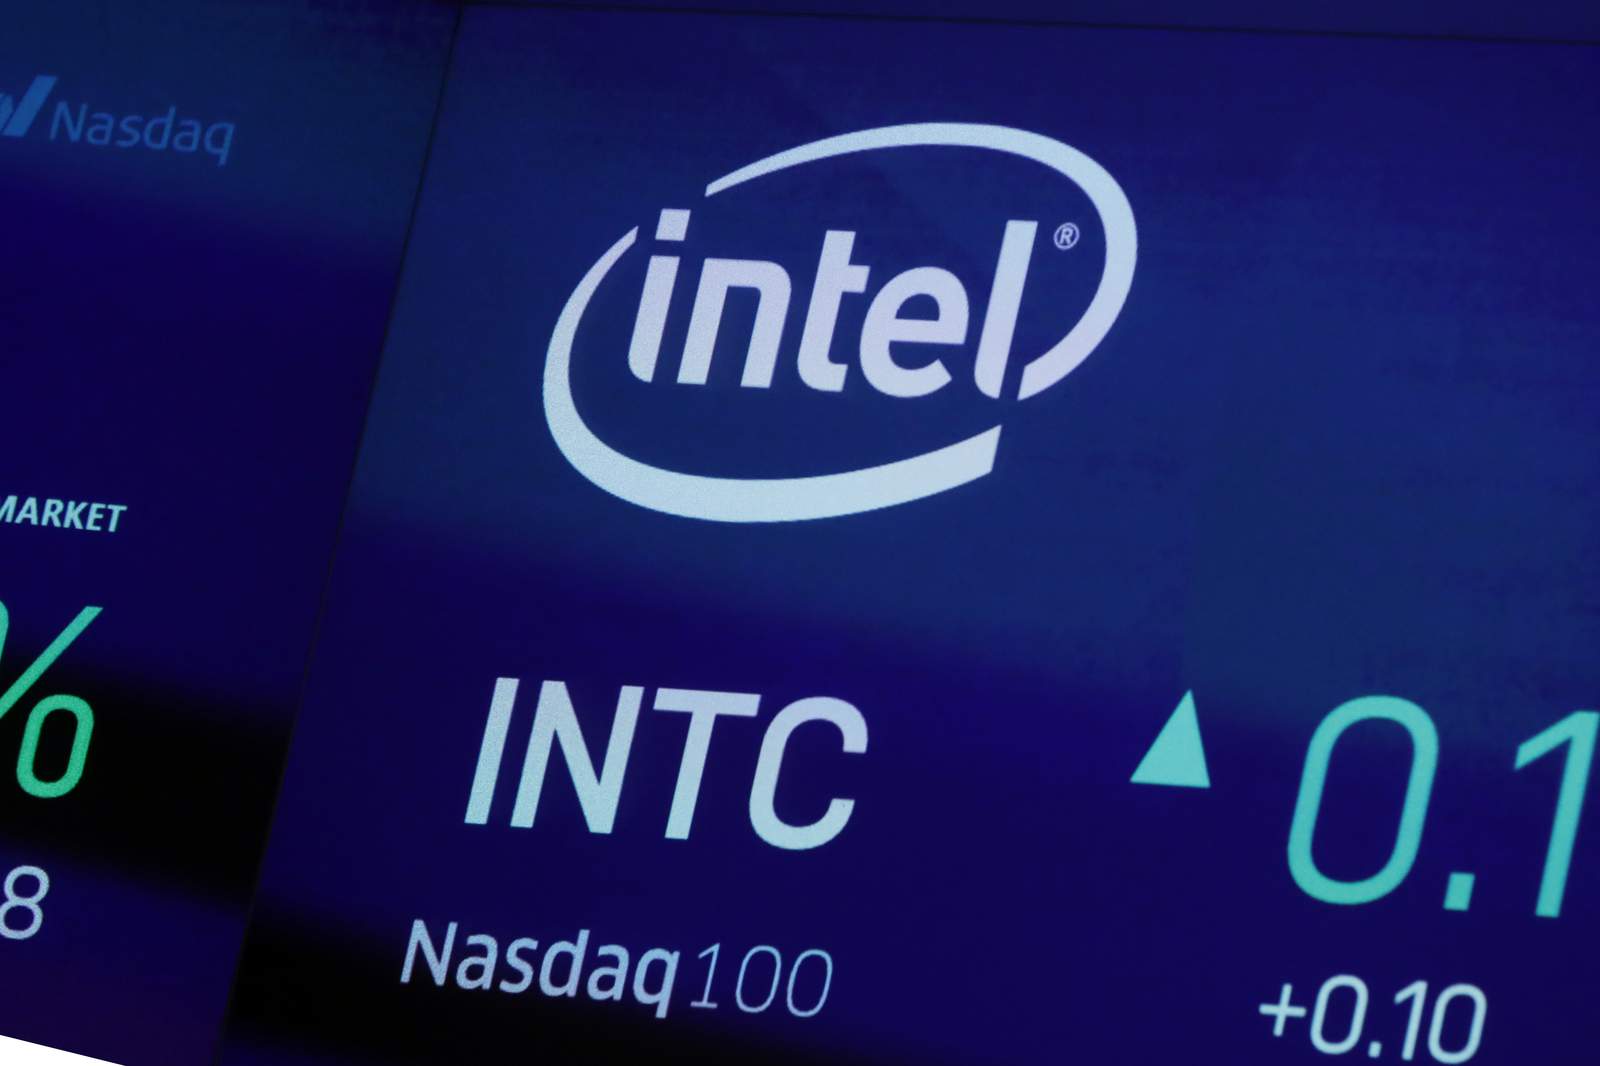 Intel replaces its chief executive after a rocky stretch